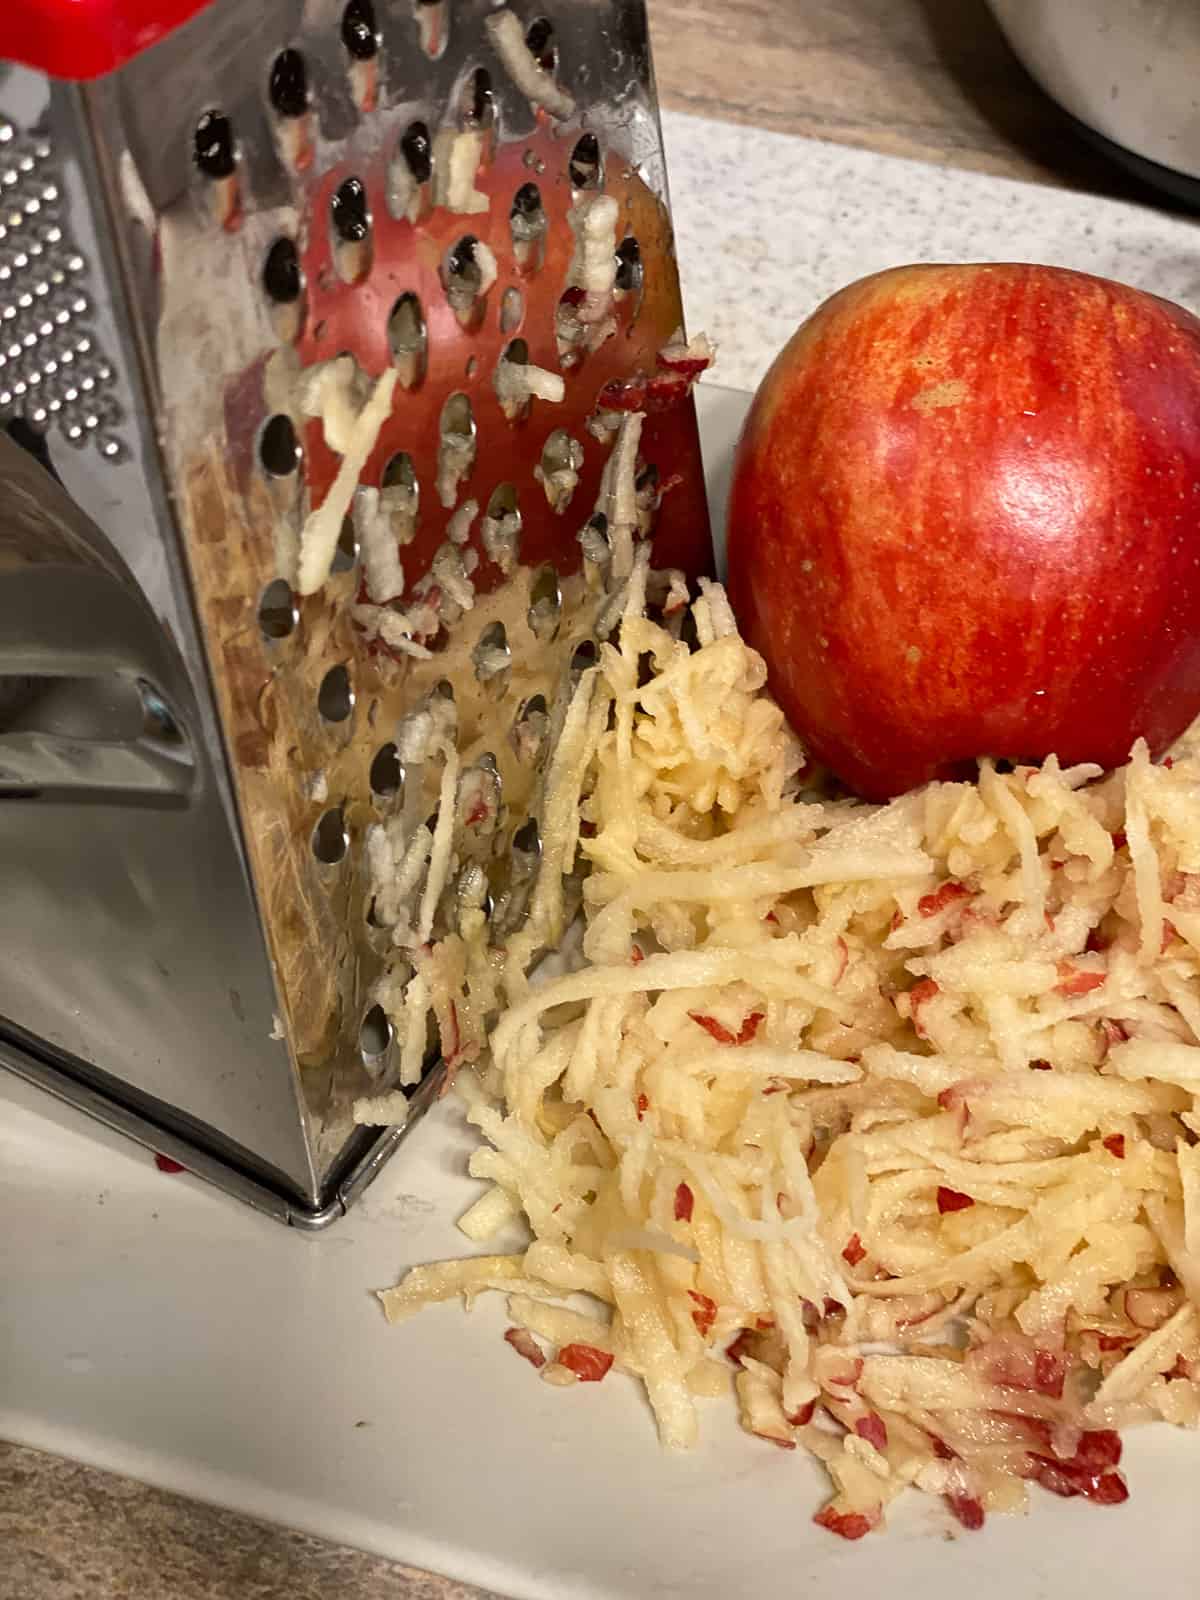 process s،t of grating apples with apple in the background